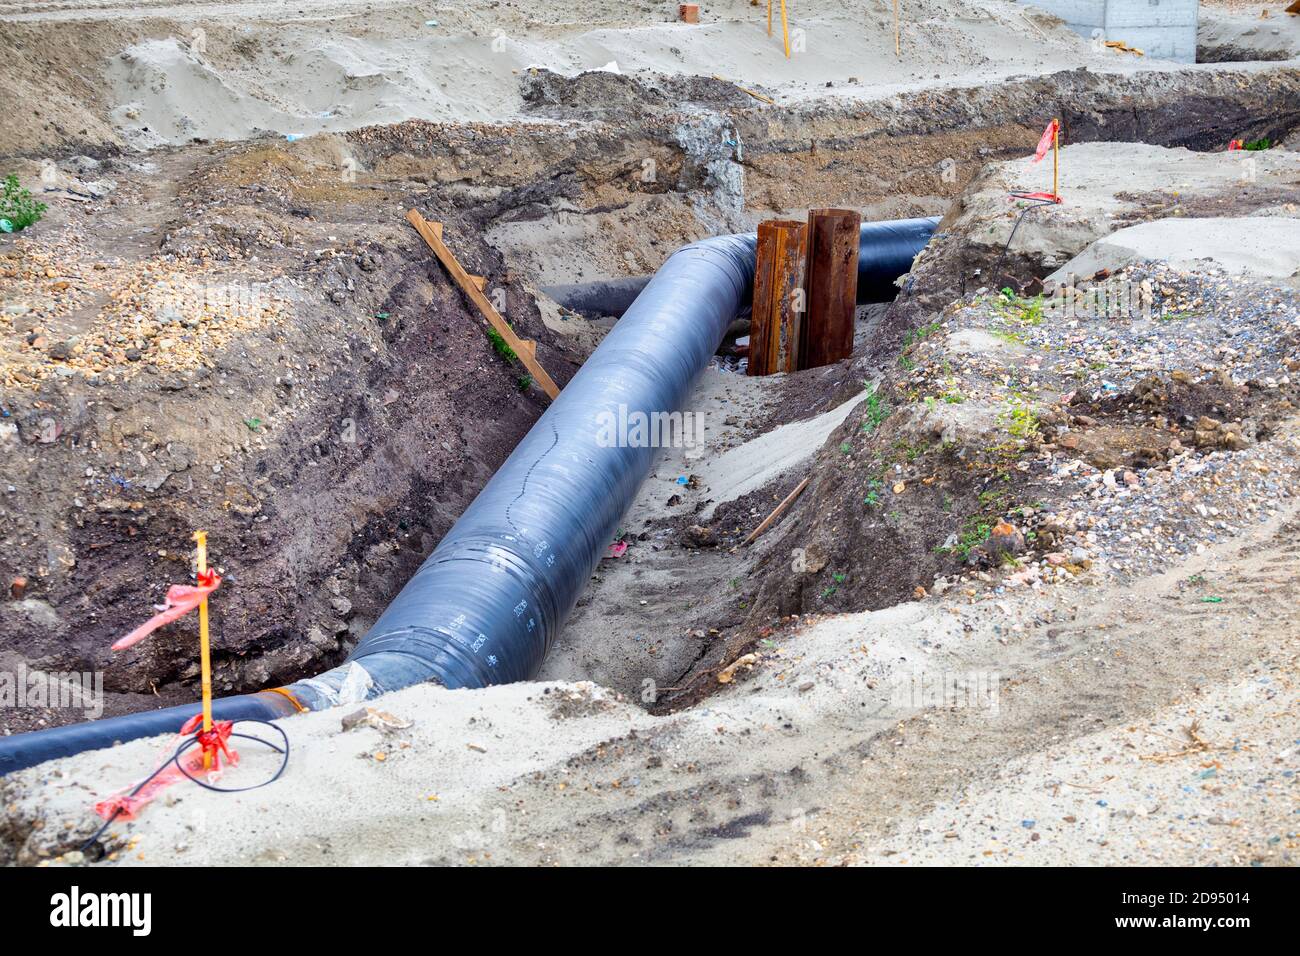 https://c8.alamy.com/comp/2D95014/installing-underground-steam-piping-systems-underground-insulation-for-buried-pipes-pre-insulated-underground-pipes-2D95014.jpg